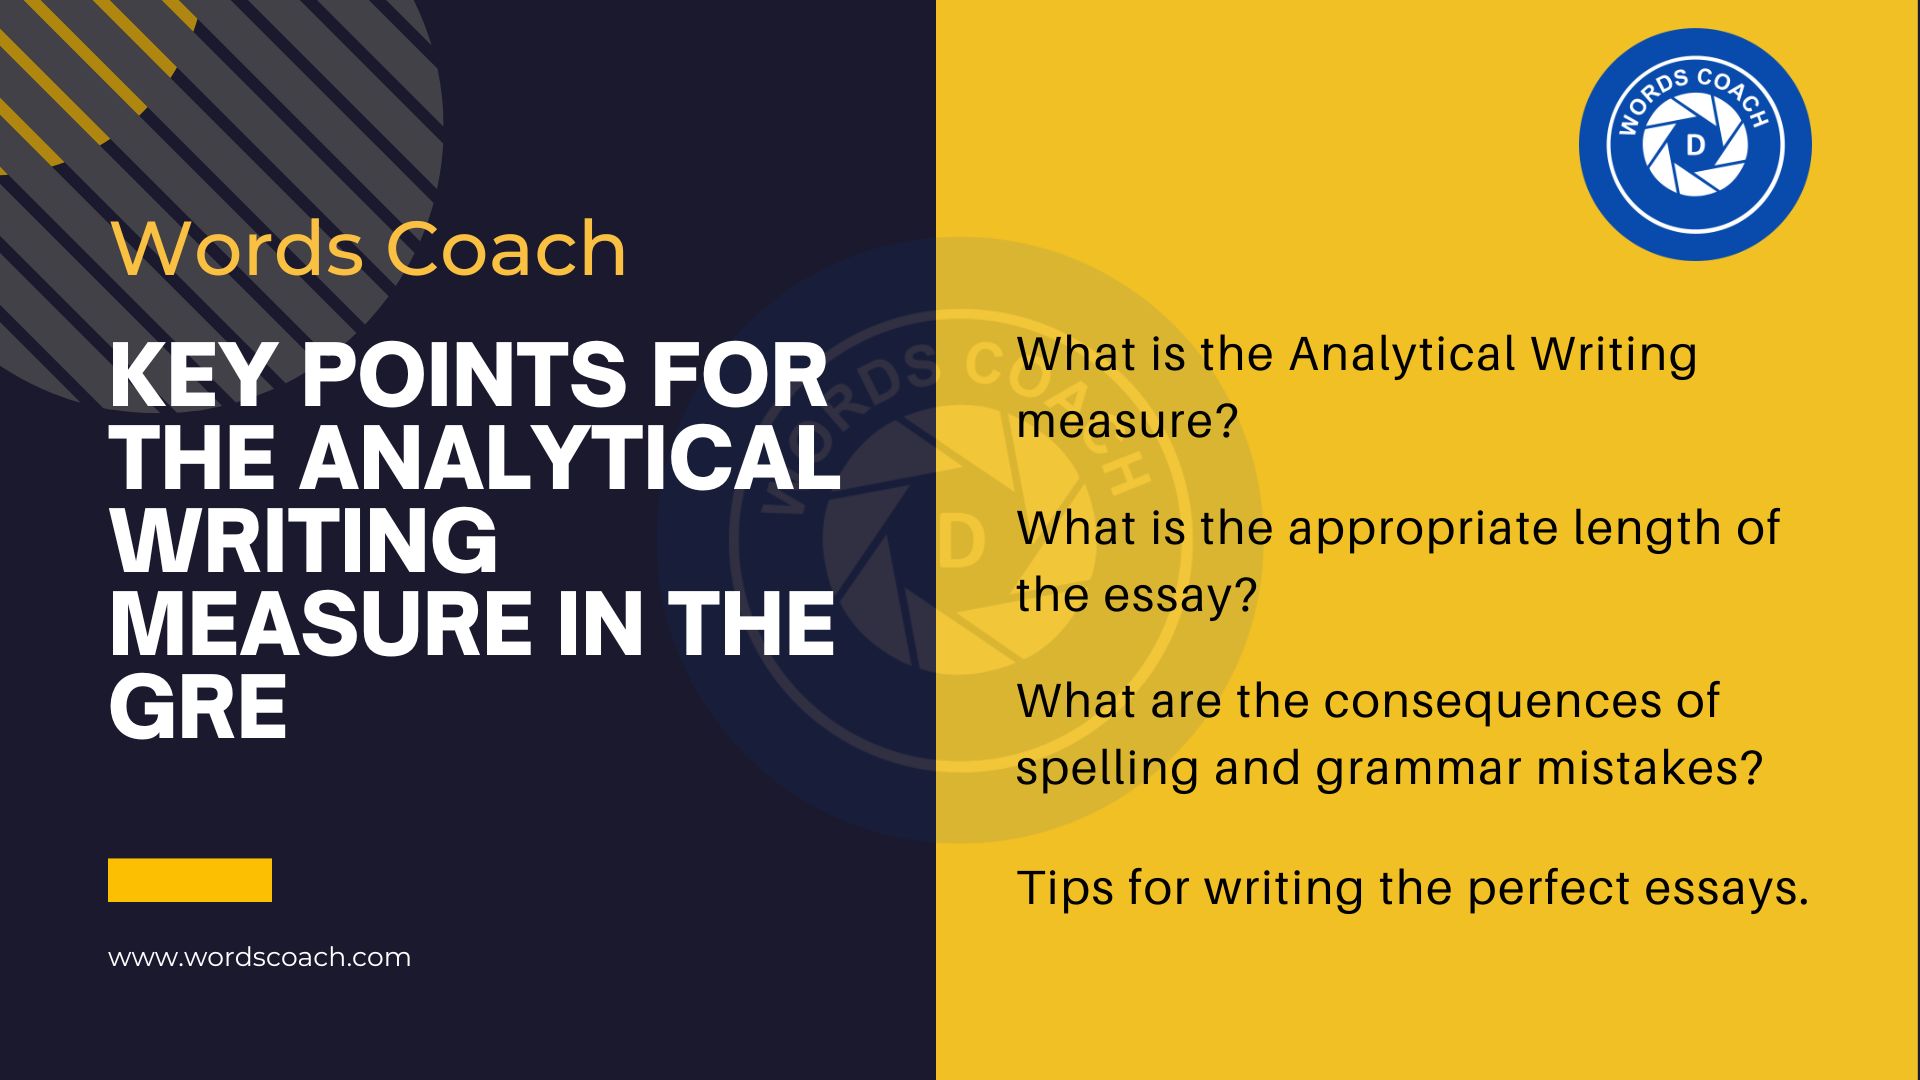 Key points for the Analytical Writing Measure in the GRE